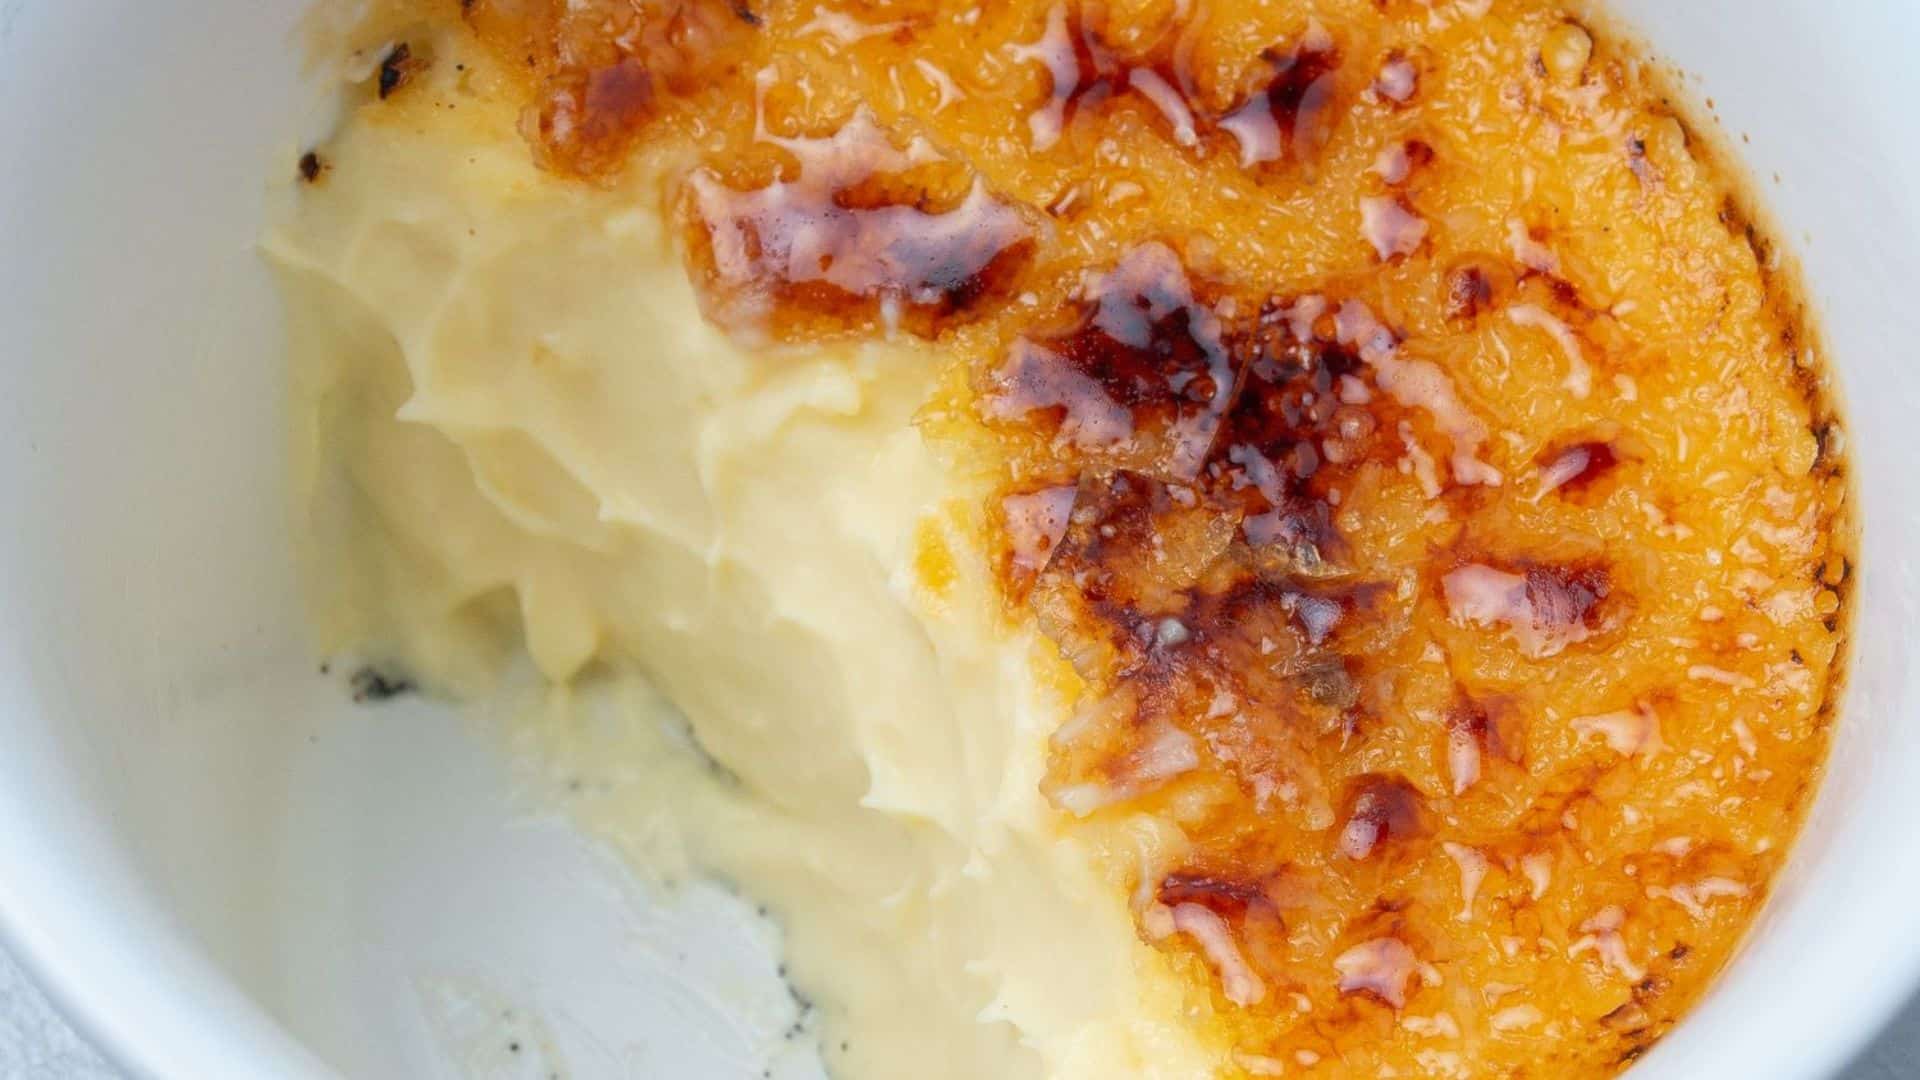 <p>This is a super easy Homemade Crème brûlée dessert recipe with a smooth and silky texture and crunchy caramel, just like in your favorite restaurant. Making Crème brûlée is shockingly easy, it comes together in literally 5 minutes using 4 simple ingredients: cream, egg yolk, vanilla, and sugar. Why this is the best recipe What...</p>